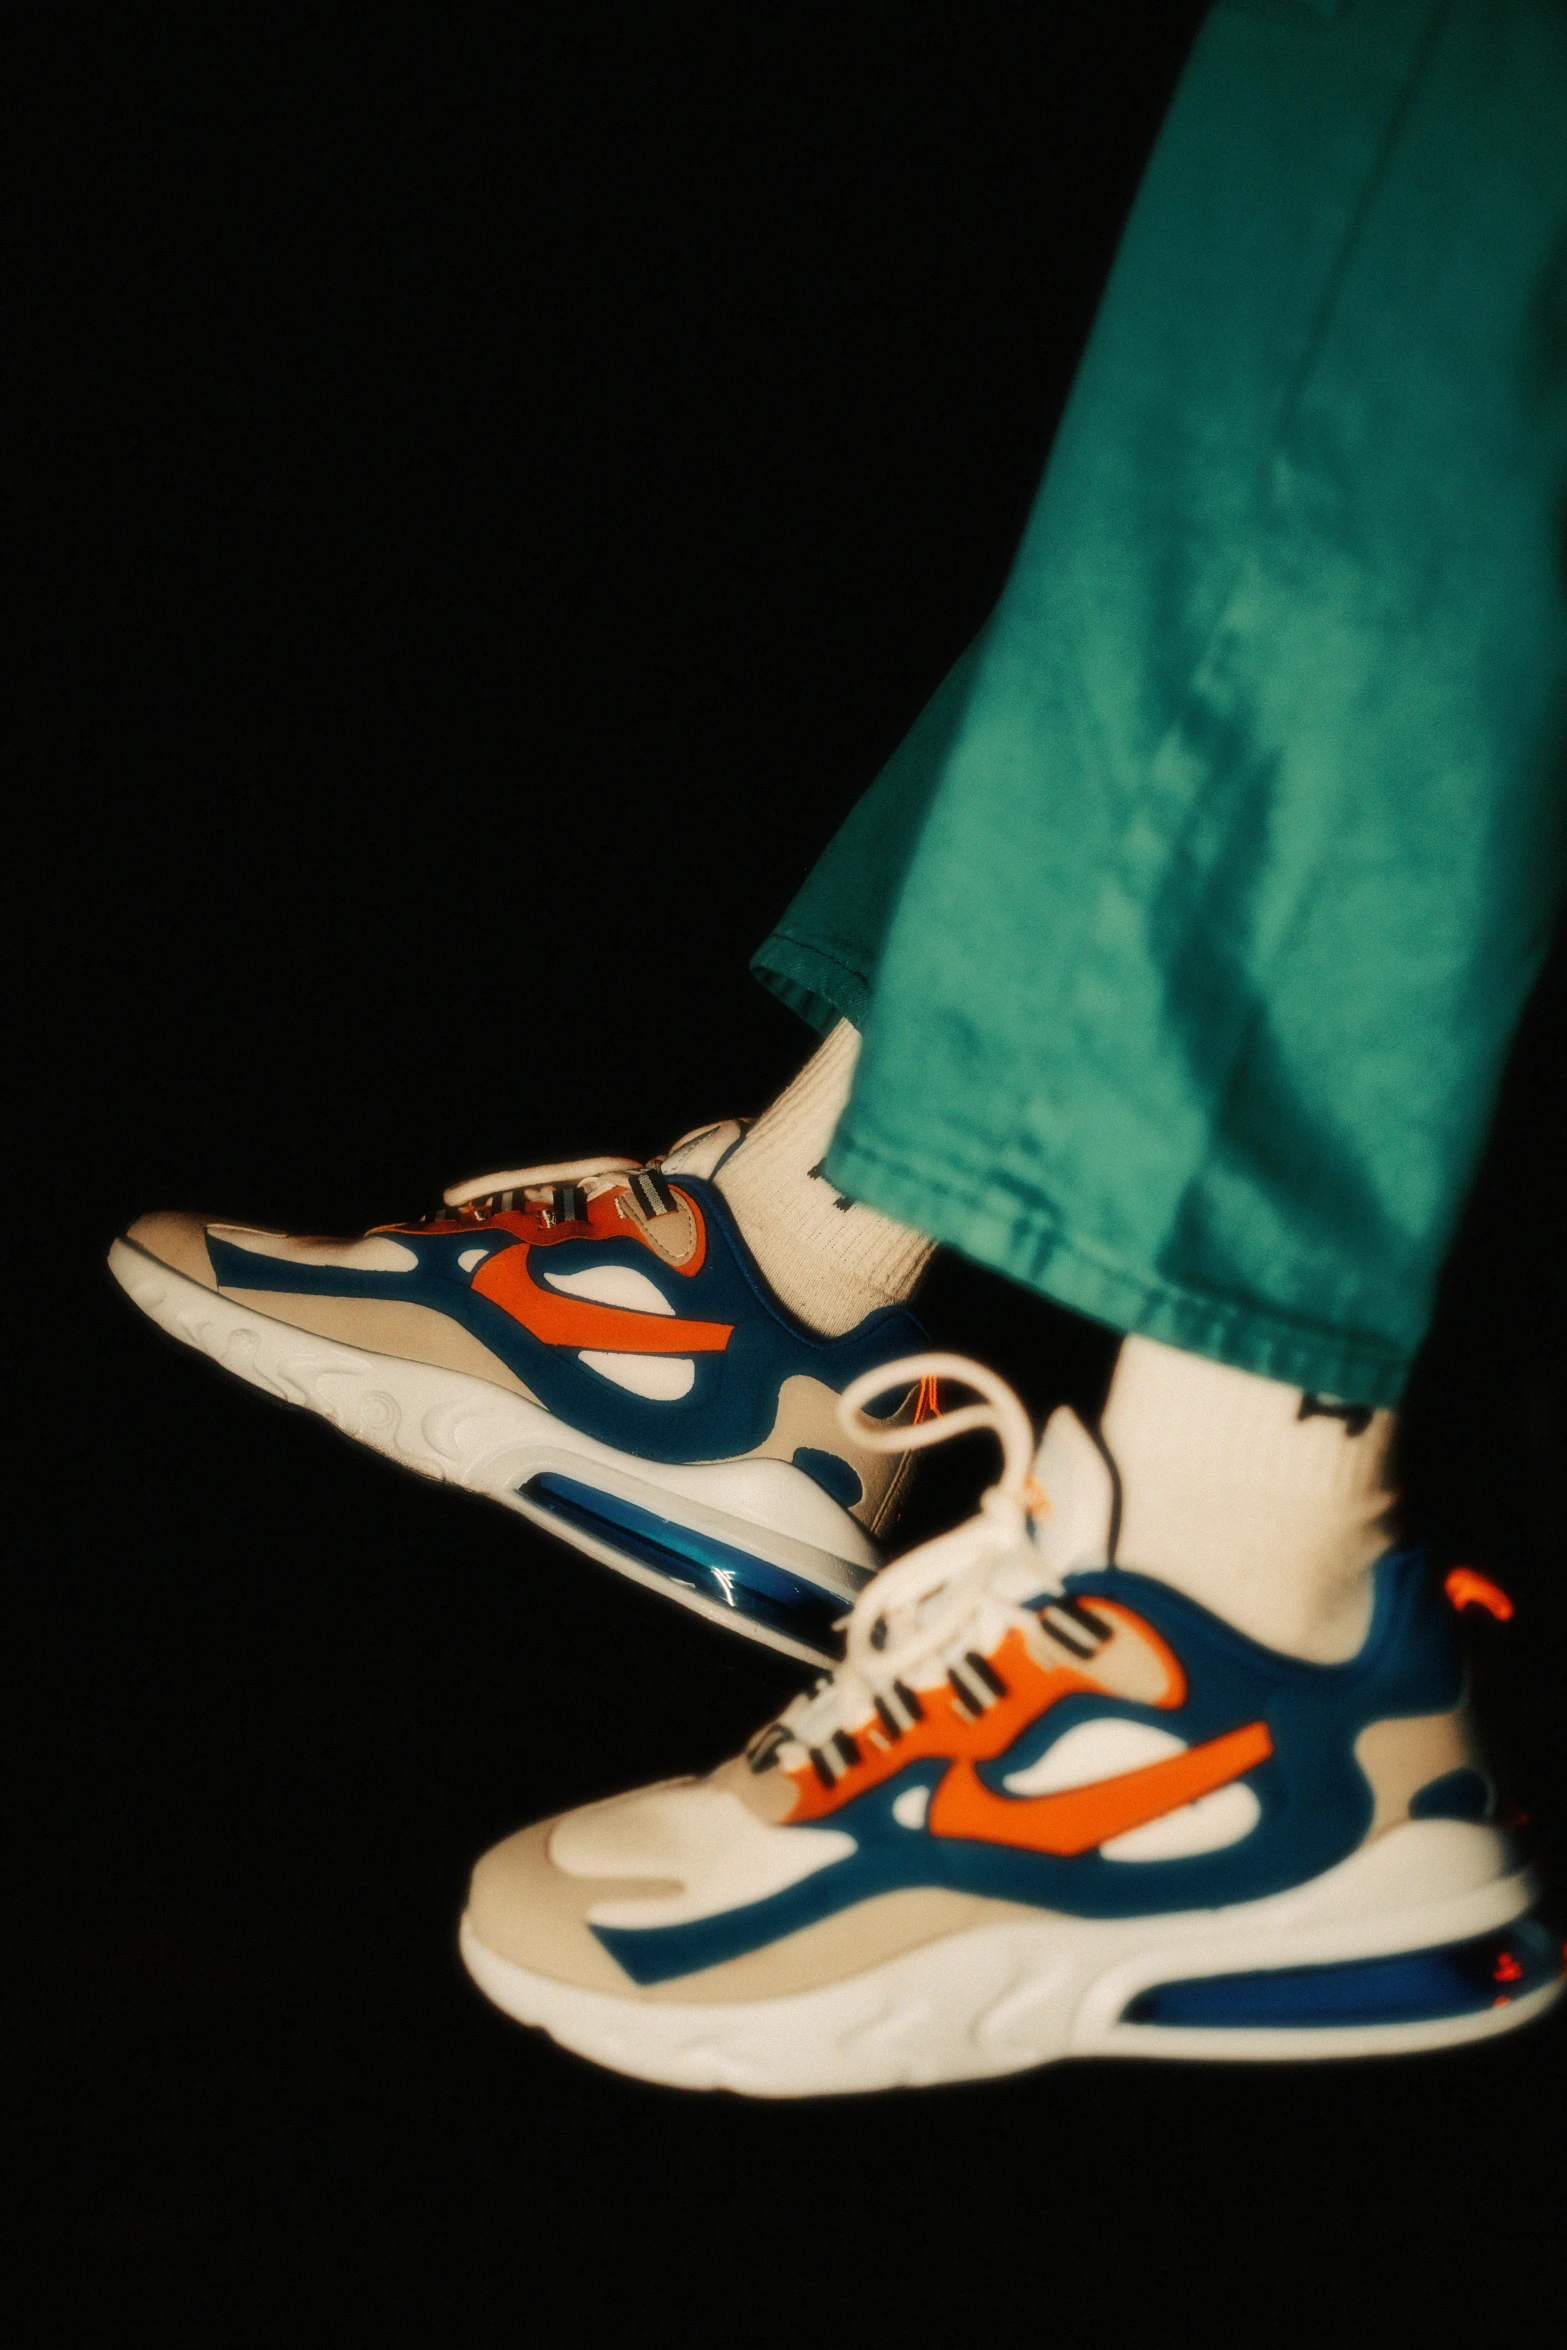 a close up image of a person's shoes, wearing green pants and white sneakers